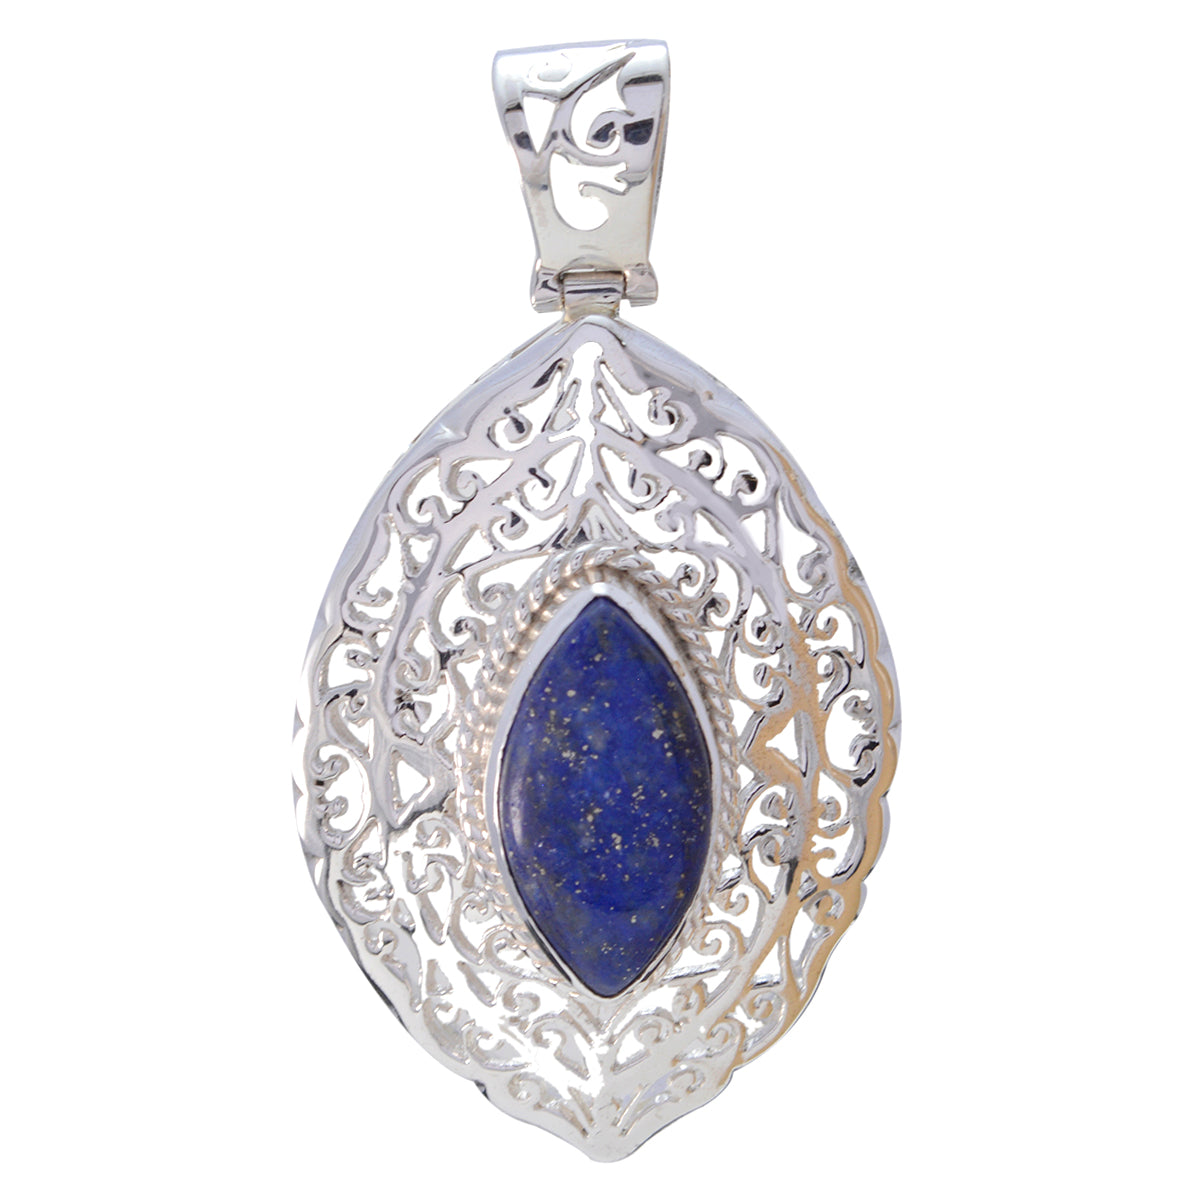 Riyo Natural Gemstone Marquise Cabochon Nevy Blue Lapis Lazuli Sterling Silver Pendant gift for labour day